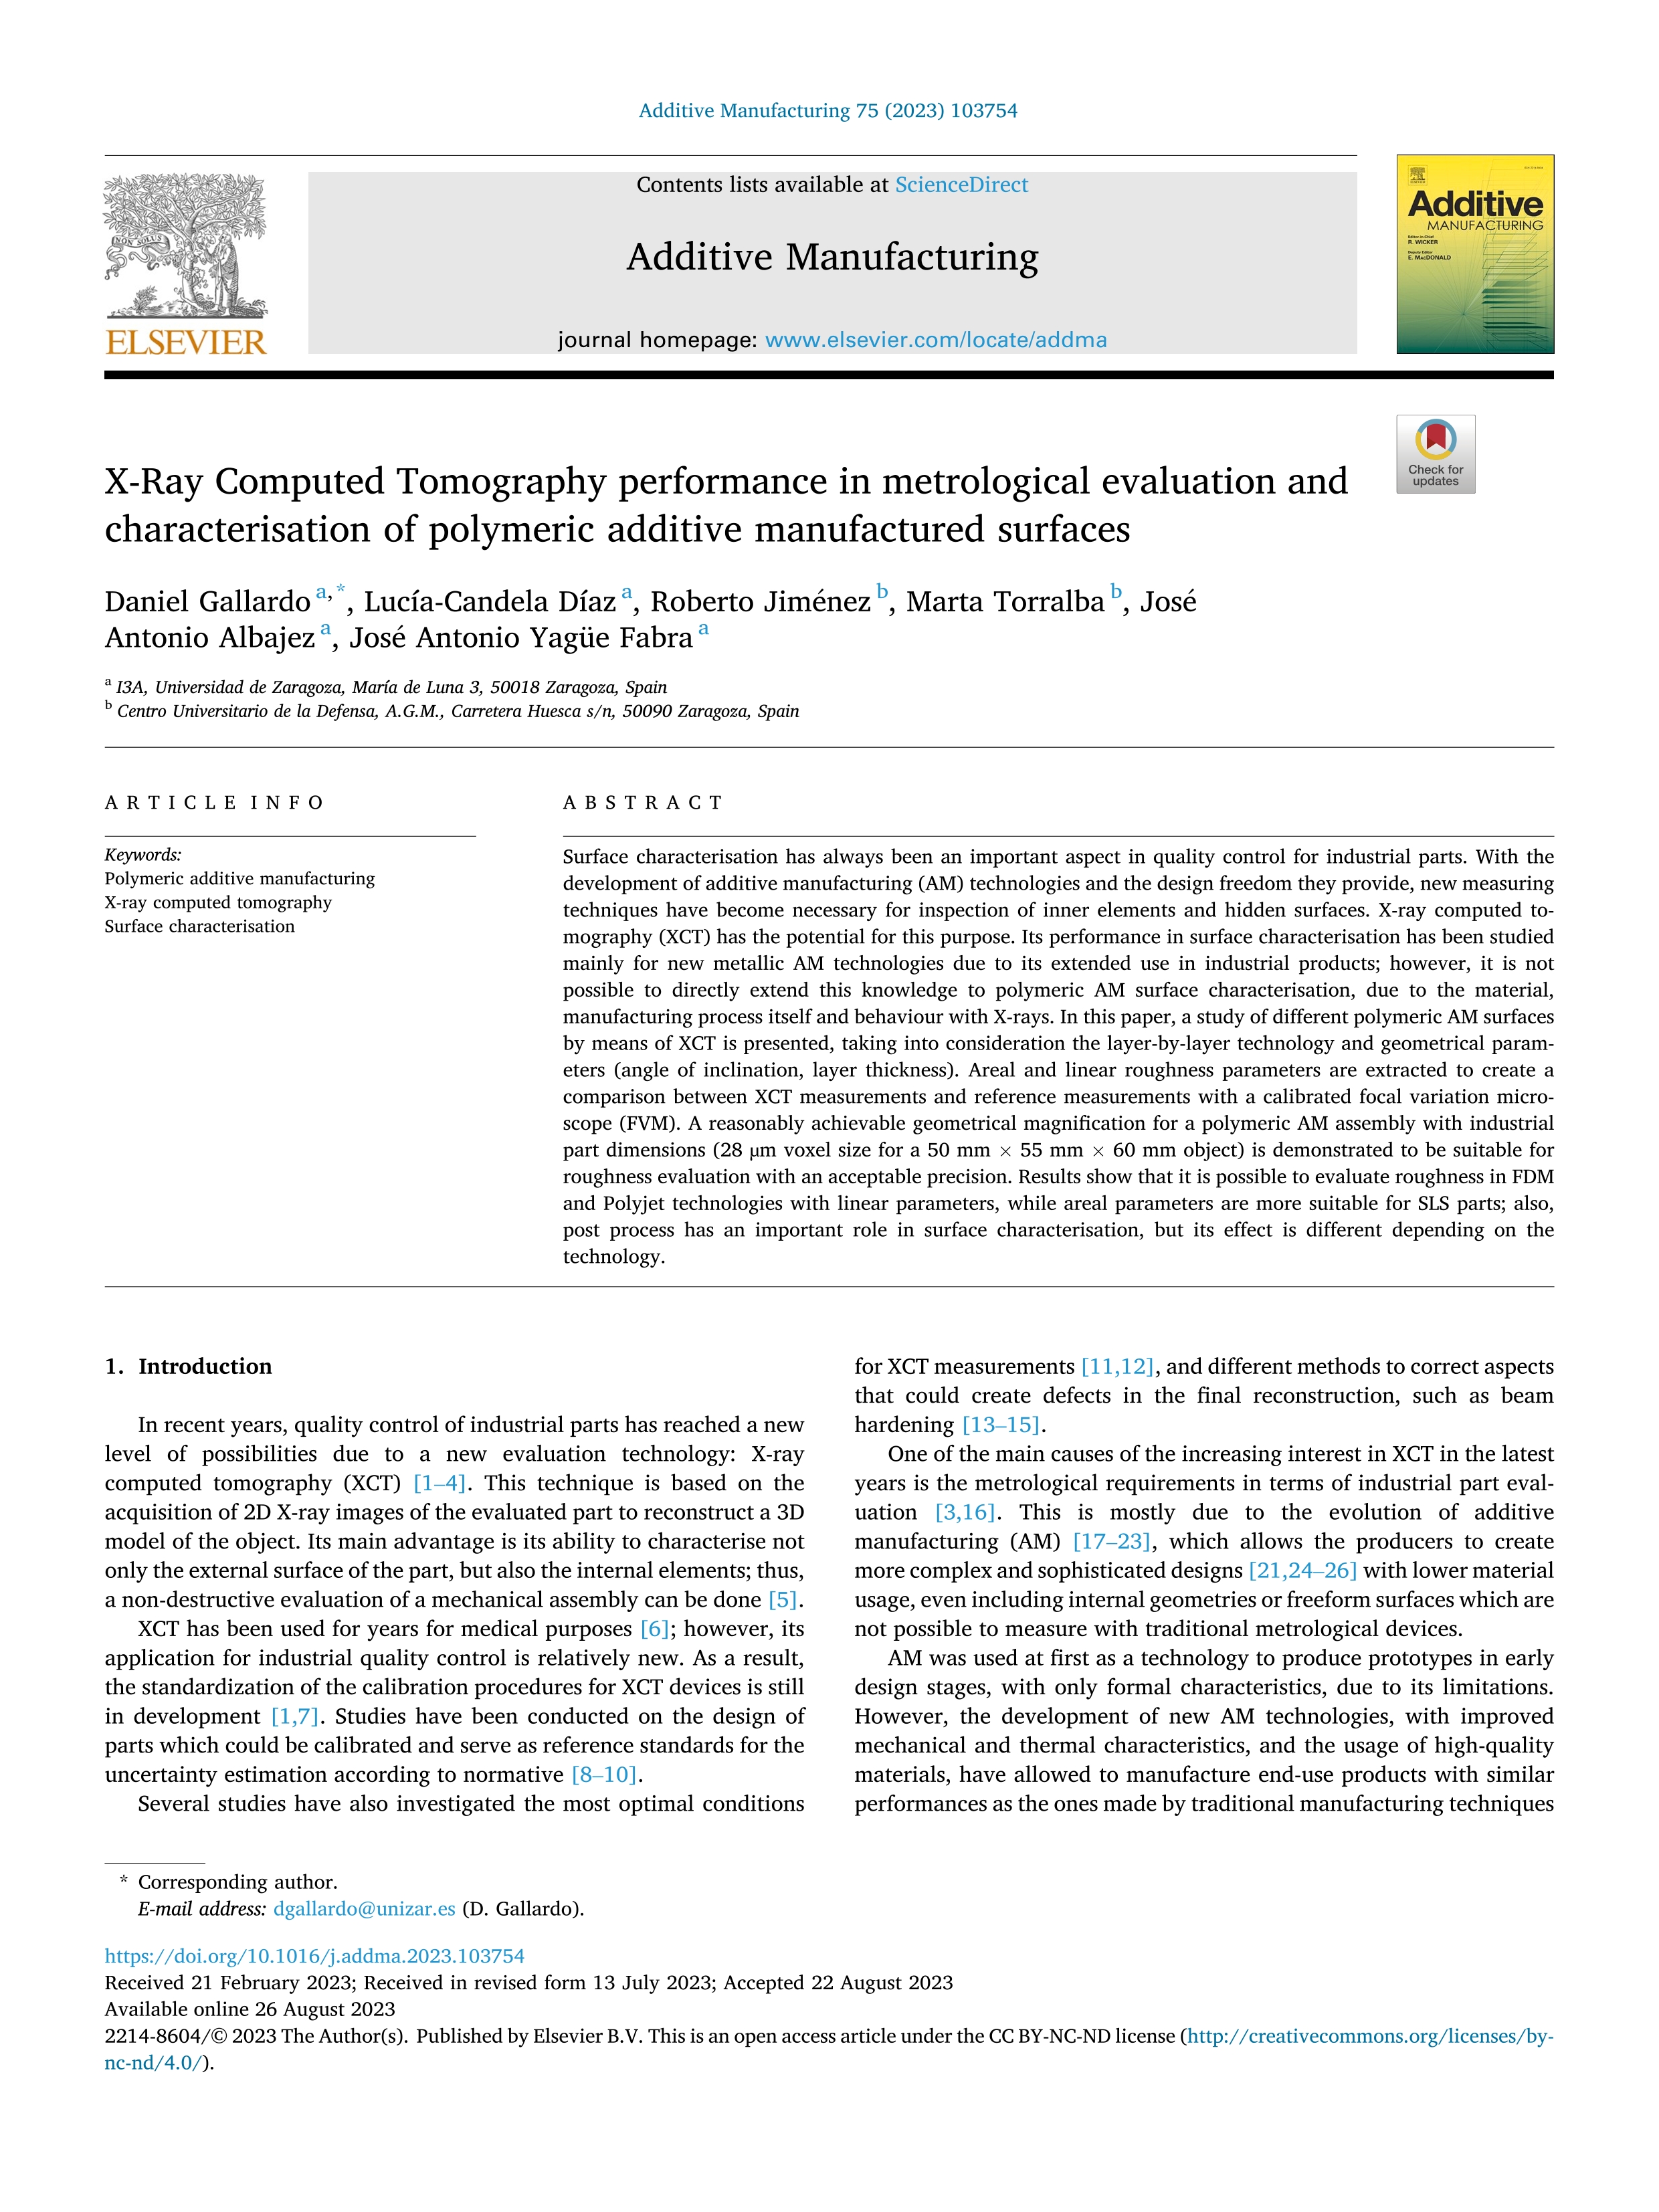 X-ray computed tomography performance in metrological evaluation and characterisation of polymeric additive manufactured surfaces.